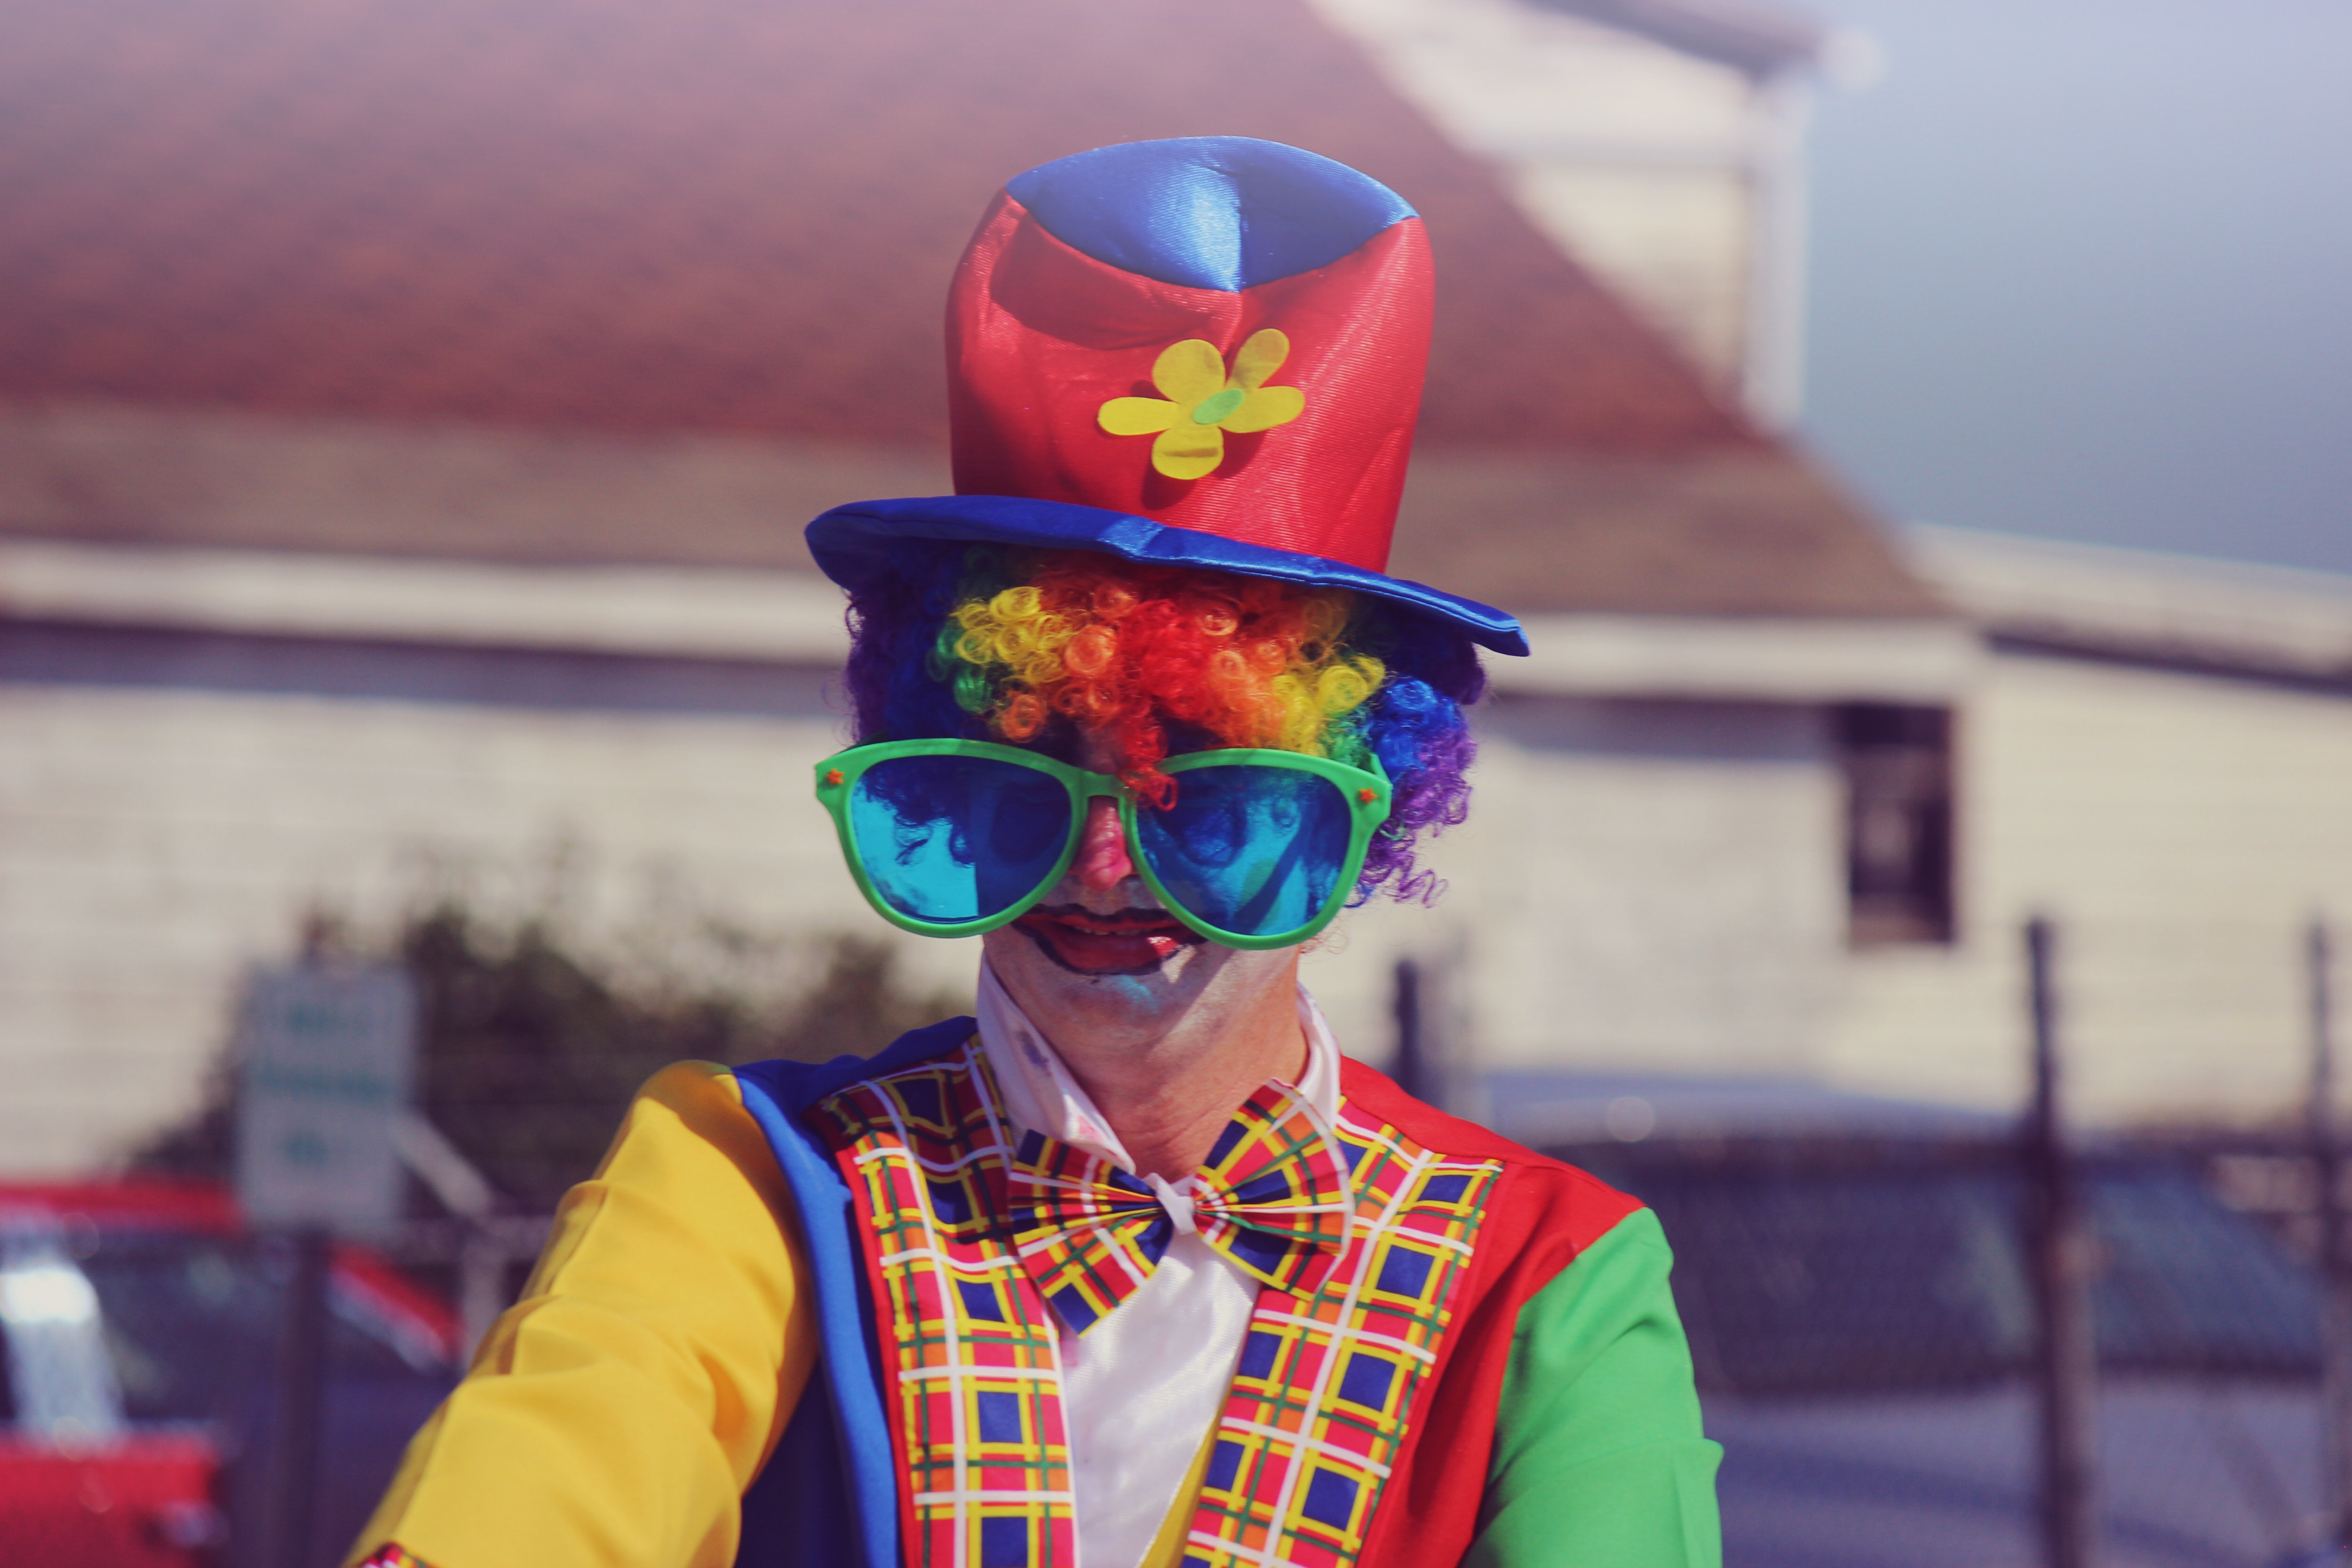 strange hobby of clowning, man in clown costume and large glasses